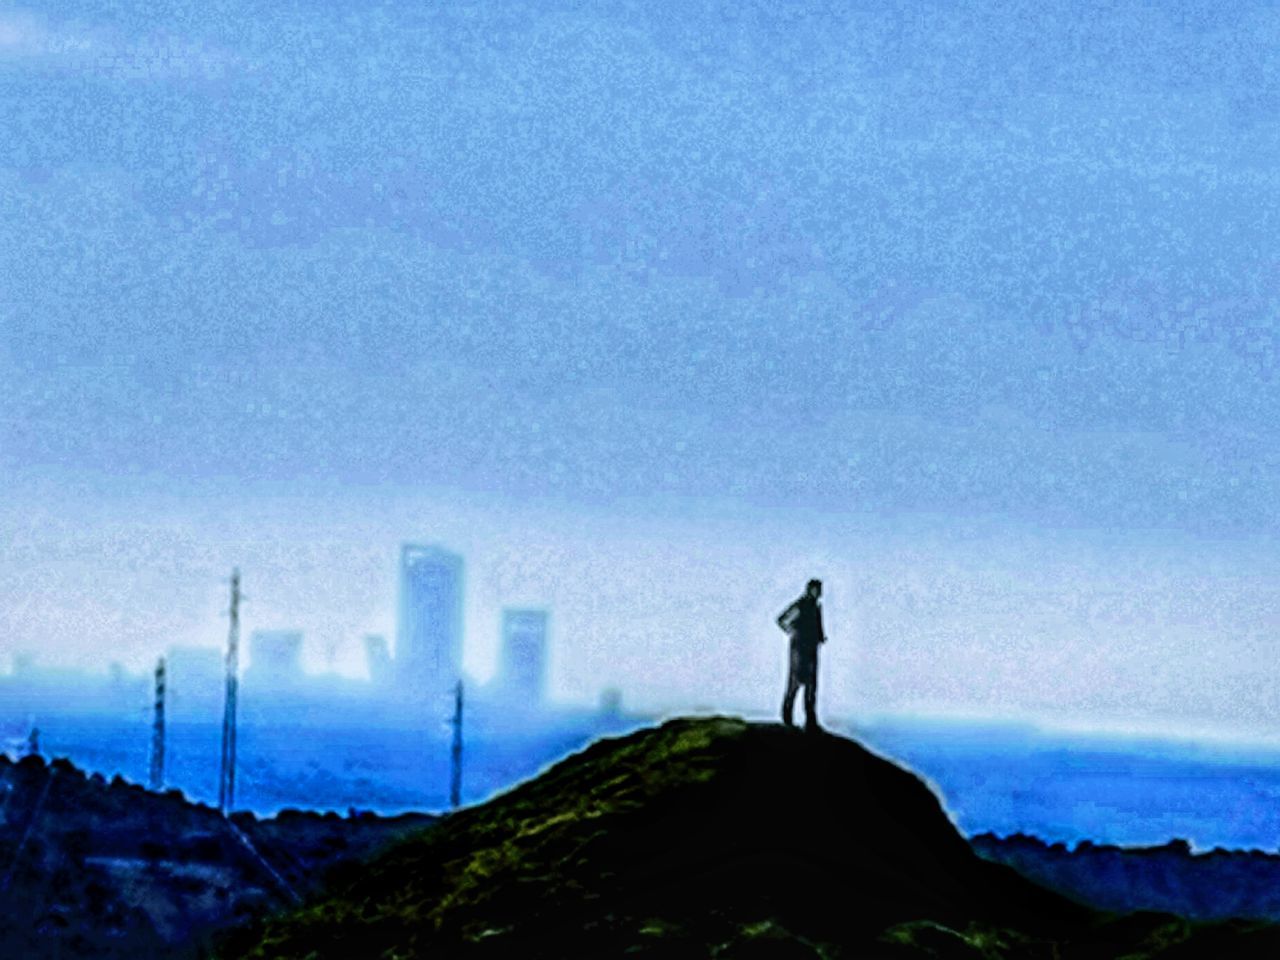 sky, horizon, mountain, one person, silhouette, nature, standing, leisure activity, scenics - nature, cloud, landscape, beauty in nature, tower, full length, men, environment, blue, outdoors, adult, architecture, morning, lifestyles, day, built structure, land, building exterior, activity, sea, wind, tranquility, copy space, rear view